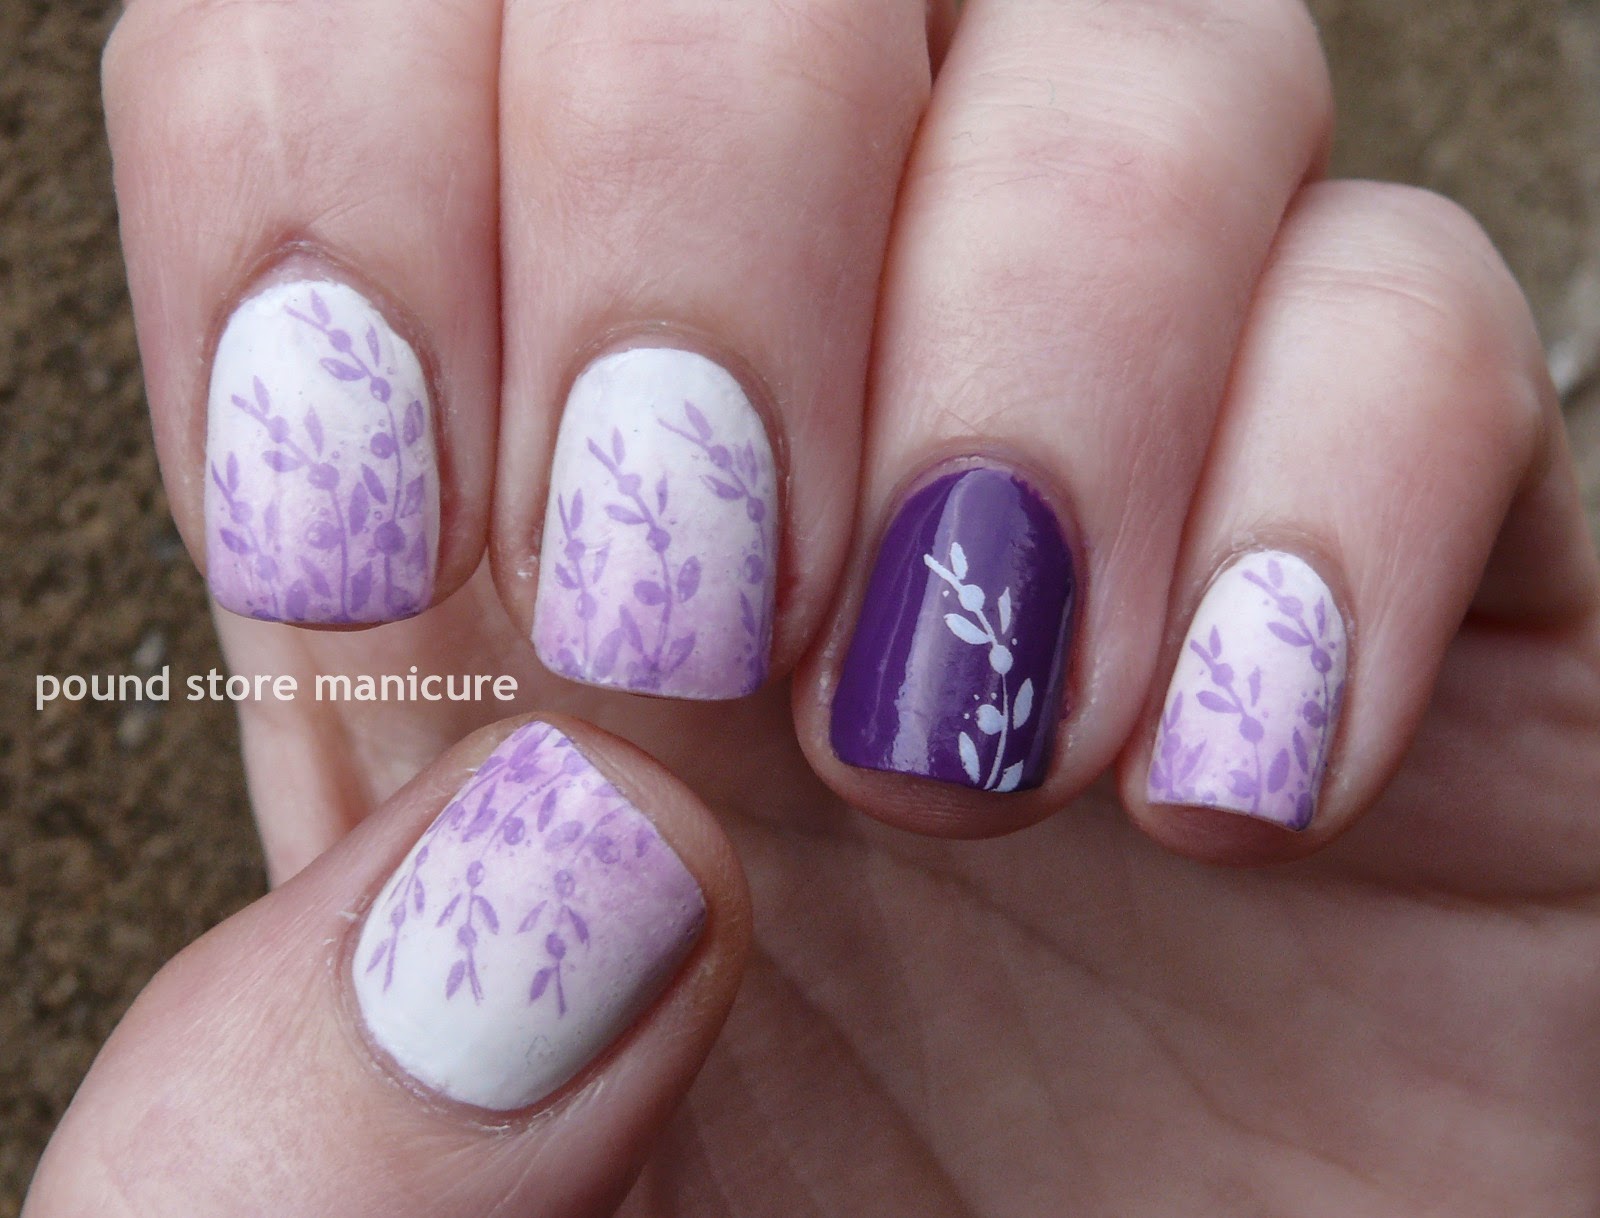 Pound Store Manicure: The Lacquer Legion - Lucky Heather